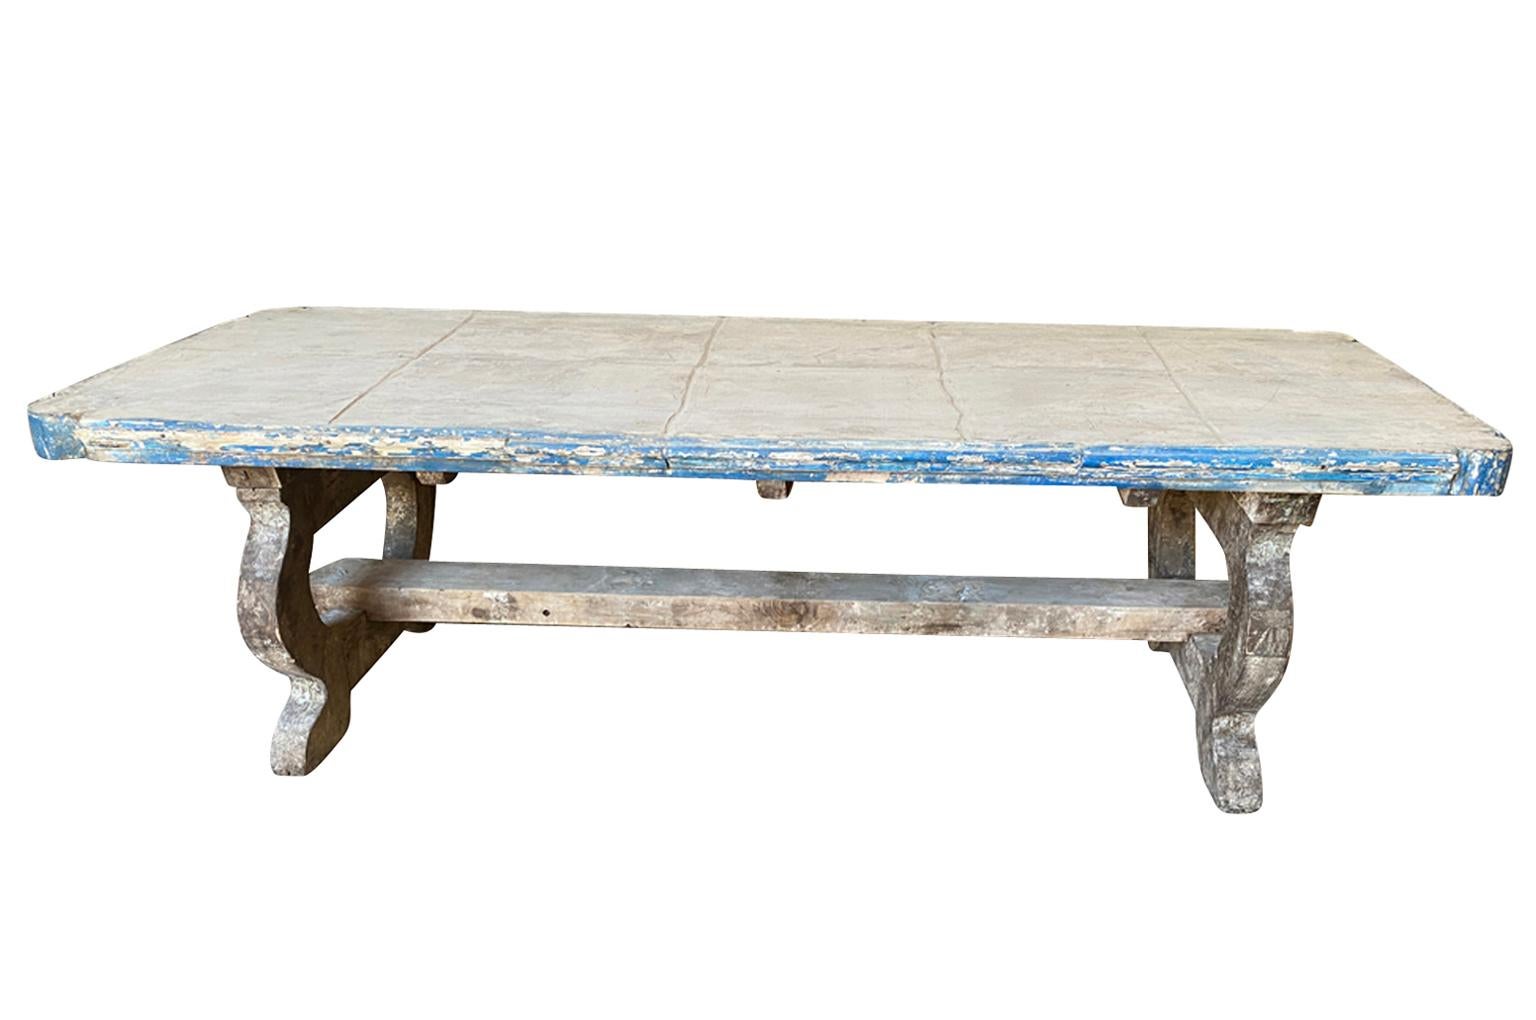 Sensational 18th century Italian dining table - Presentation table from Naples, Italy. Soundly constructed in painted wood This stunning table originally was used as a presentation table in luxury fish shop. Gorgeous color and patina.